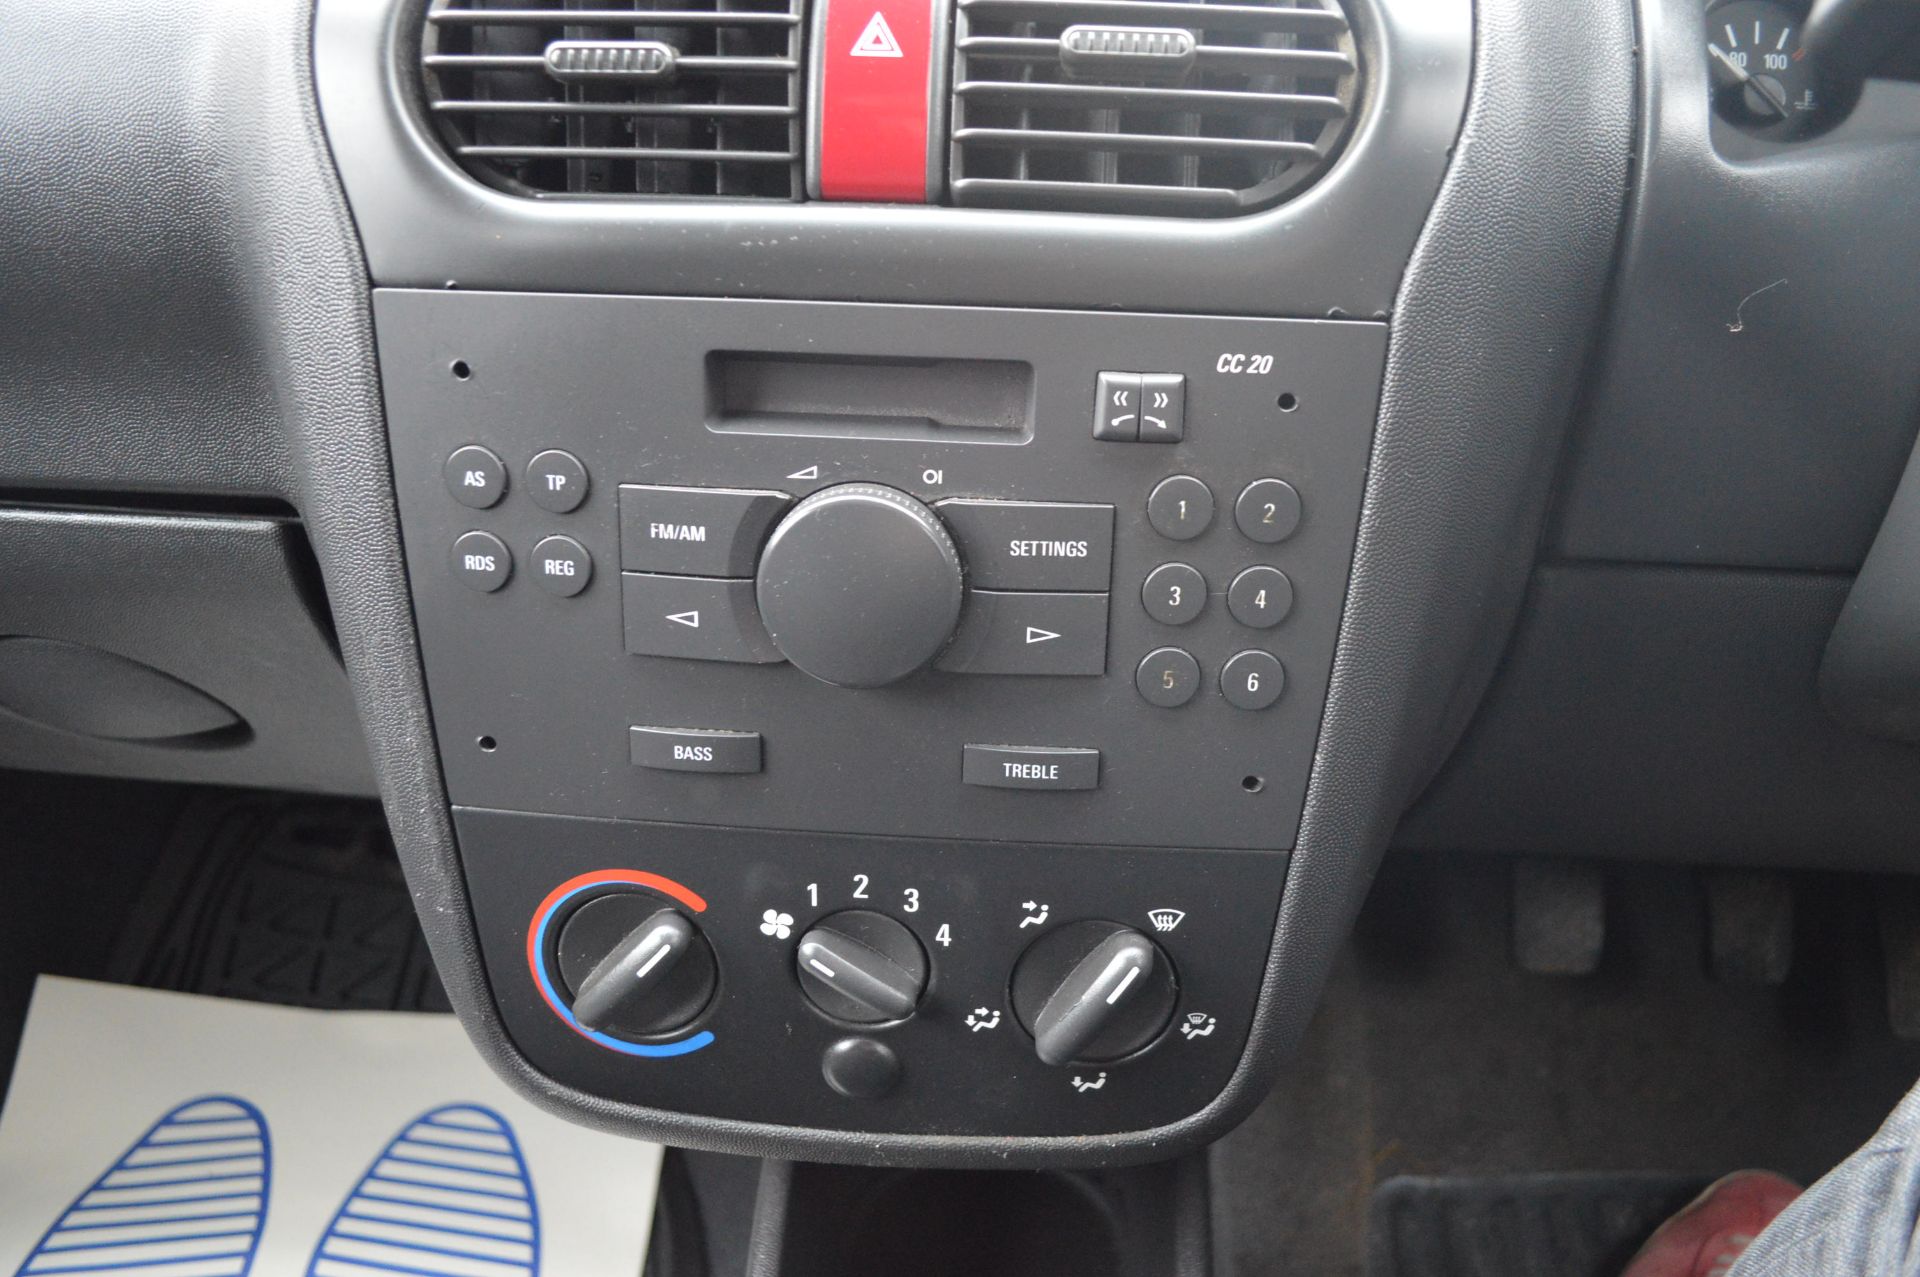 2008/57 REG VAUXHALL COMBO 1700 CDTI, SHOWING 1 OWNER FROM NEW *NO VAT* - Image 15 of 16